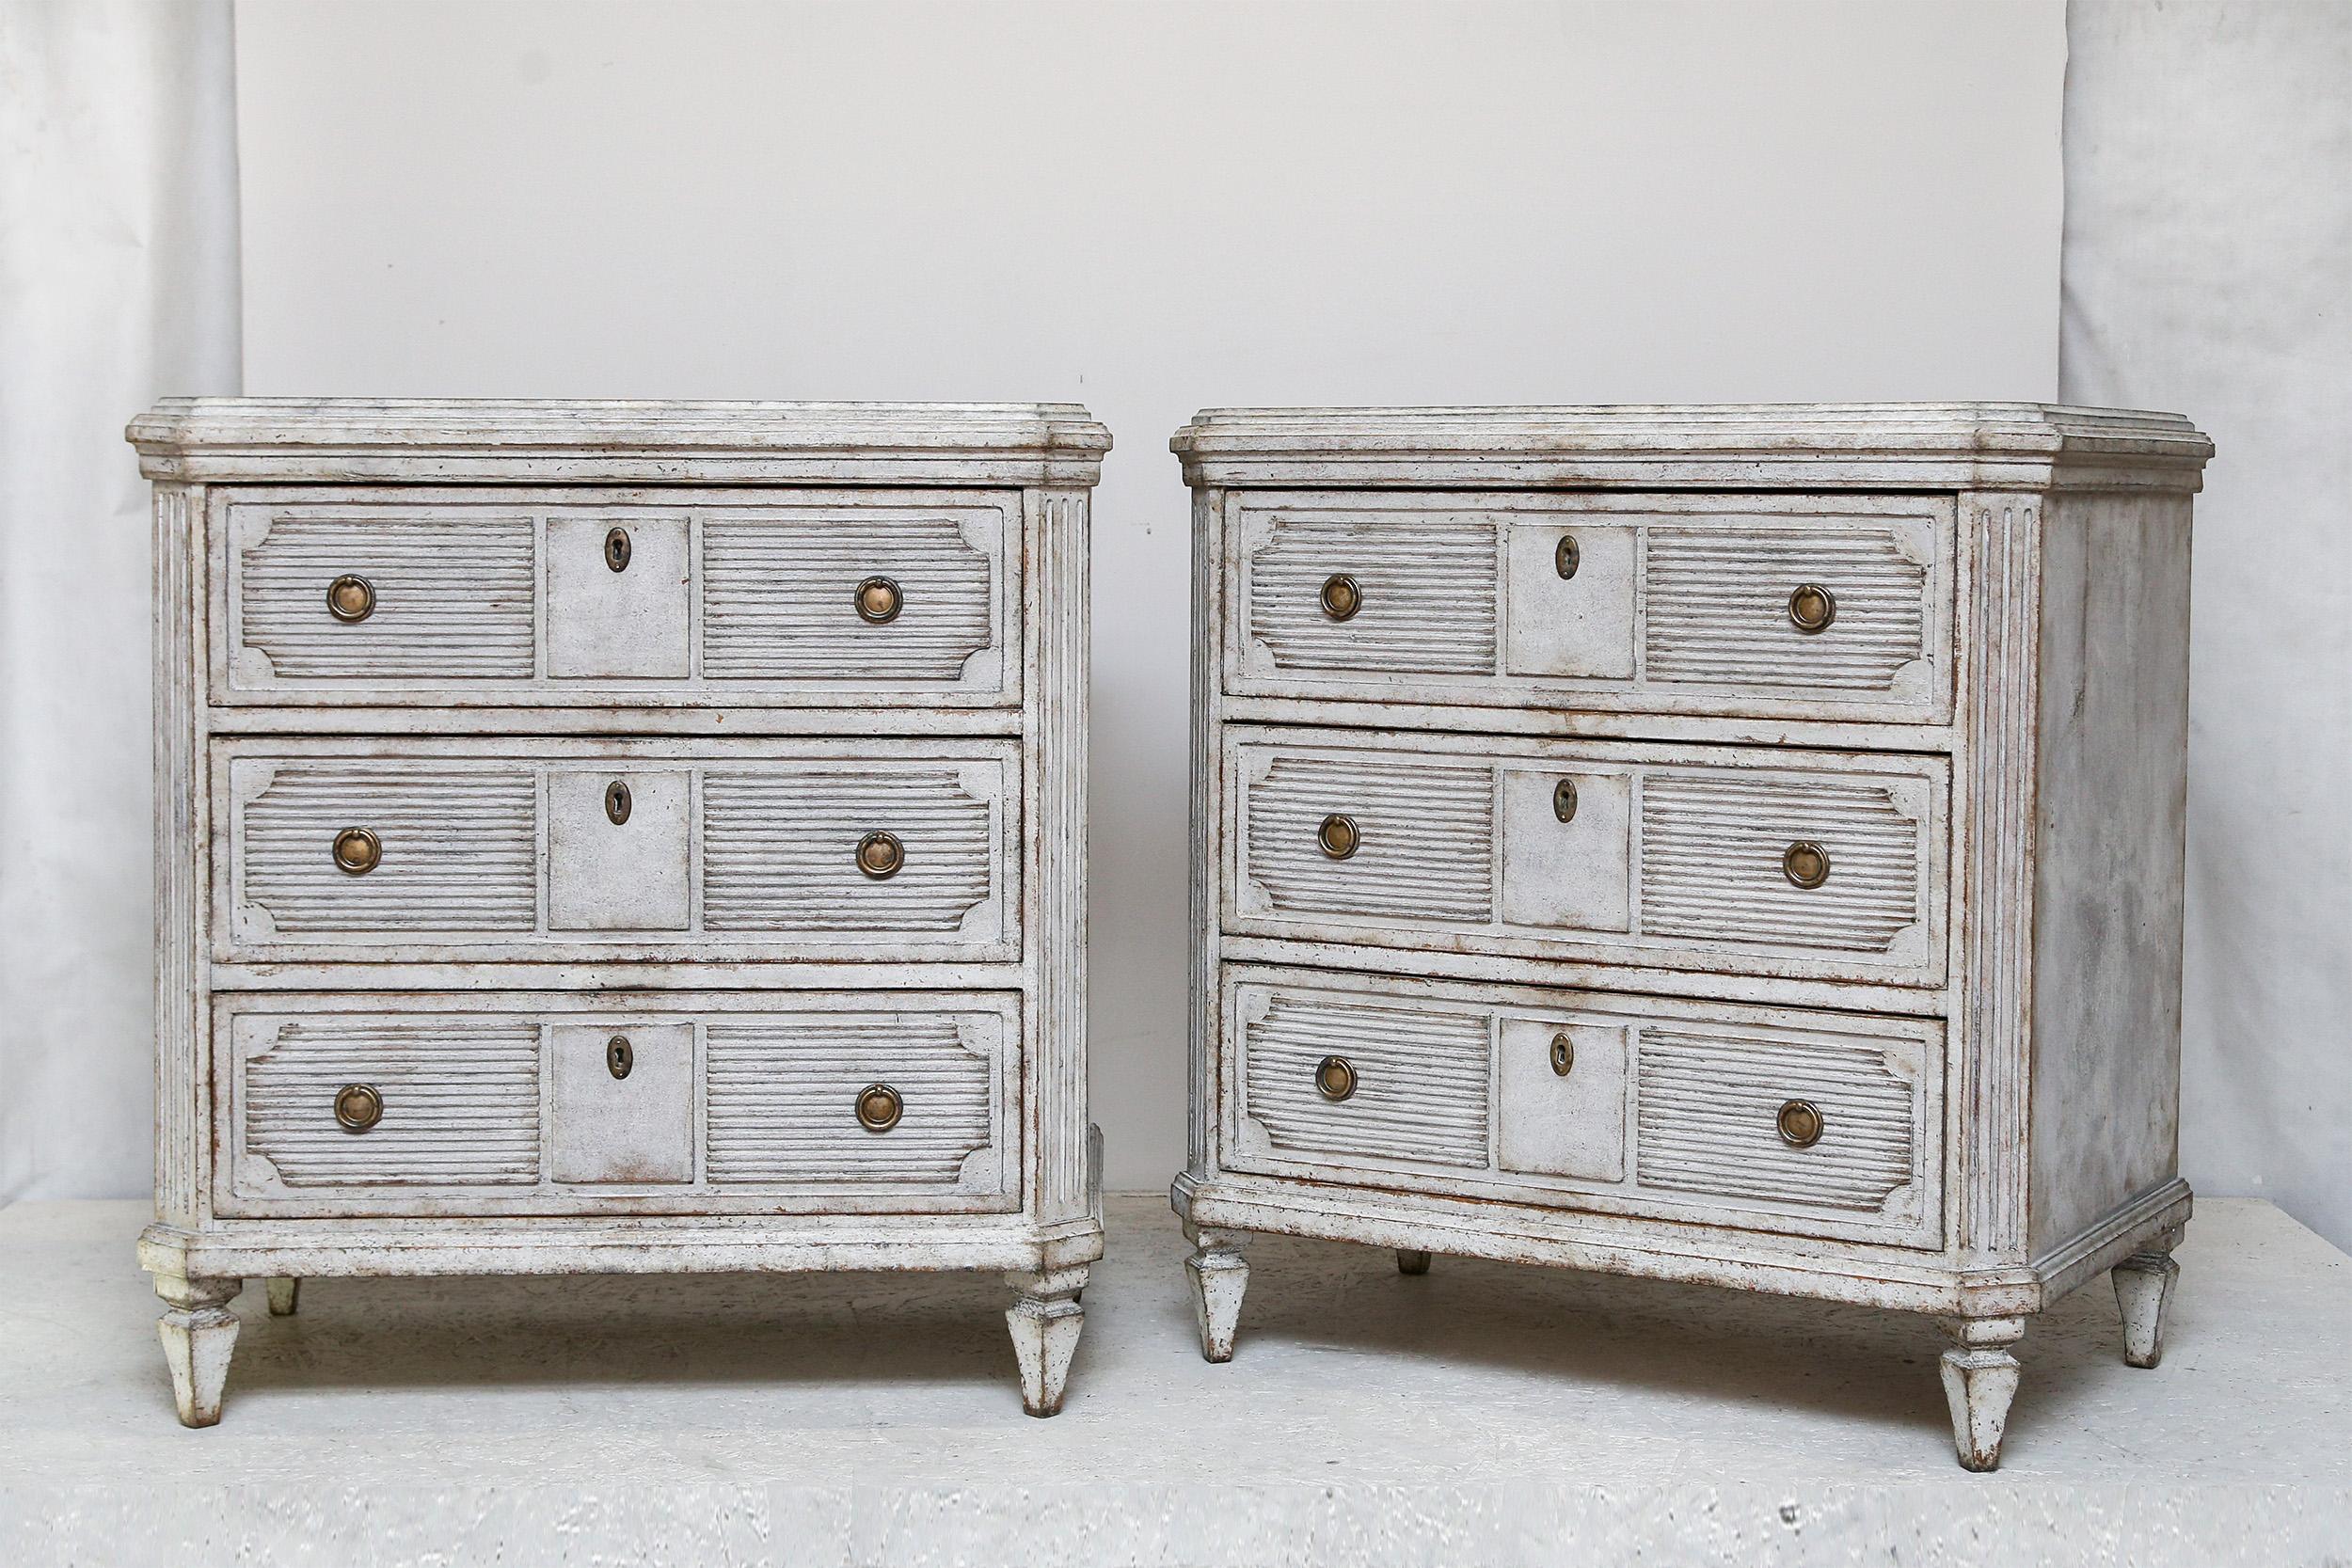 Shipping update - please message us directly with your city and zip/postcode for a delivery cost to your location on this item - please do not request shipping from 1st dibs

Circa 1850/1880 antique Swedish Gustavian Grey White painted chest of